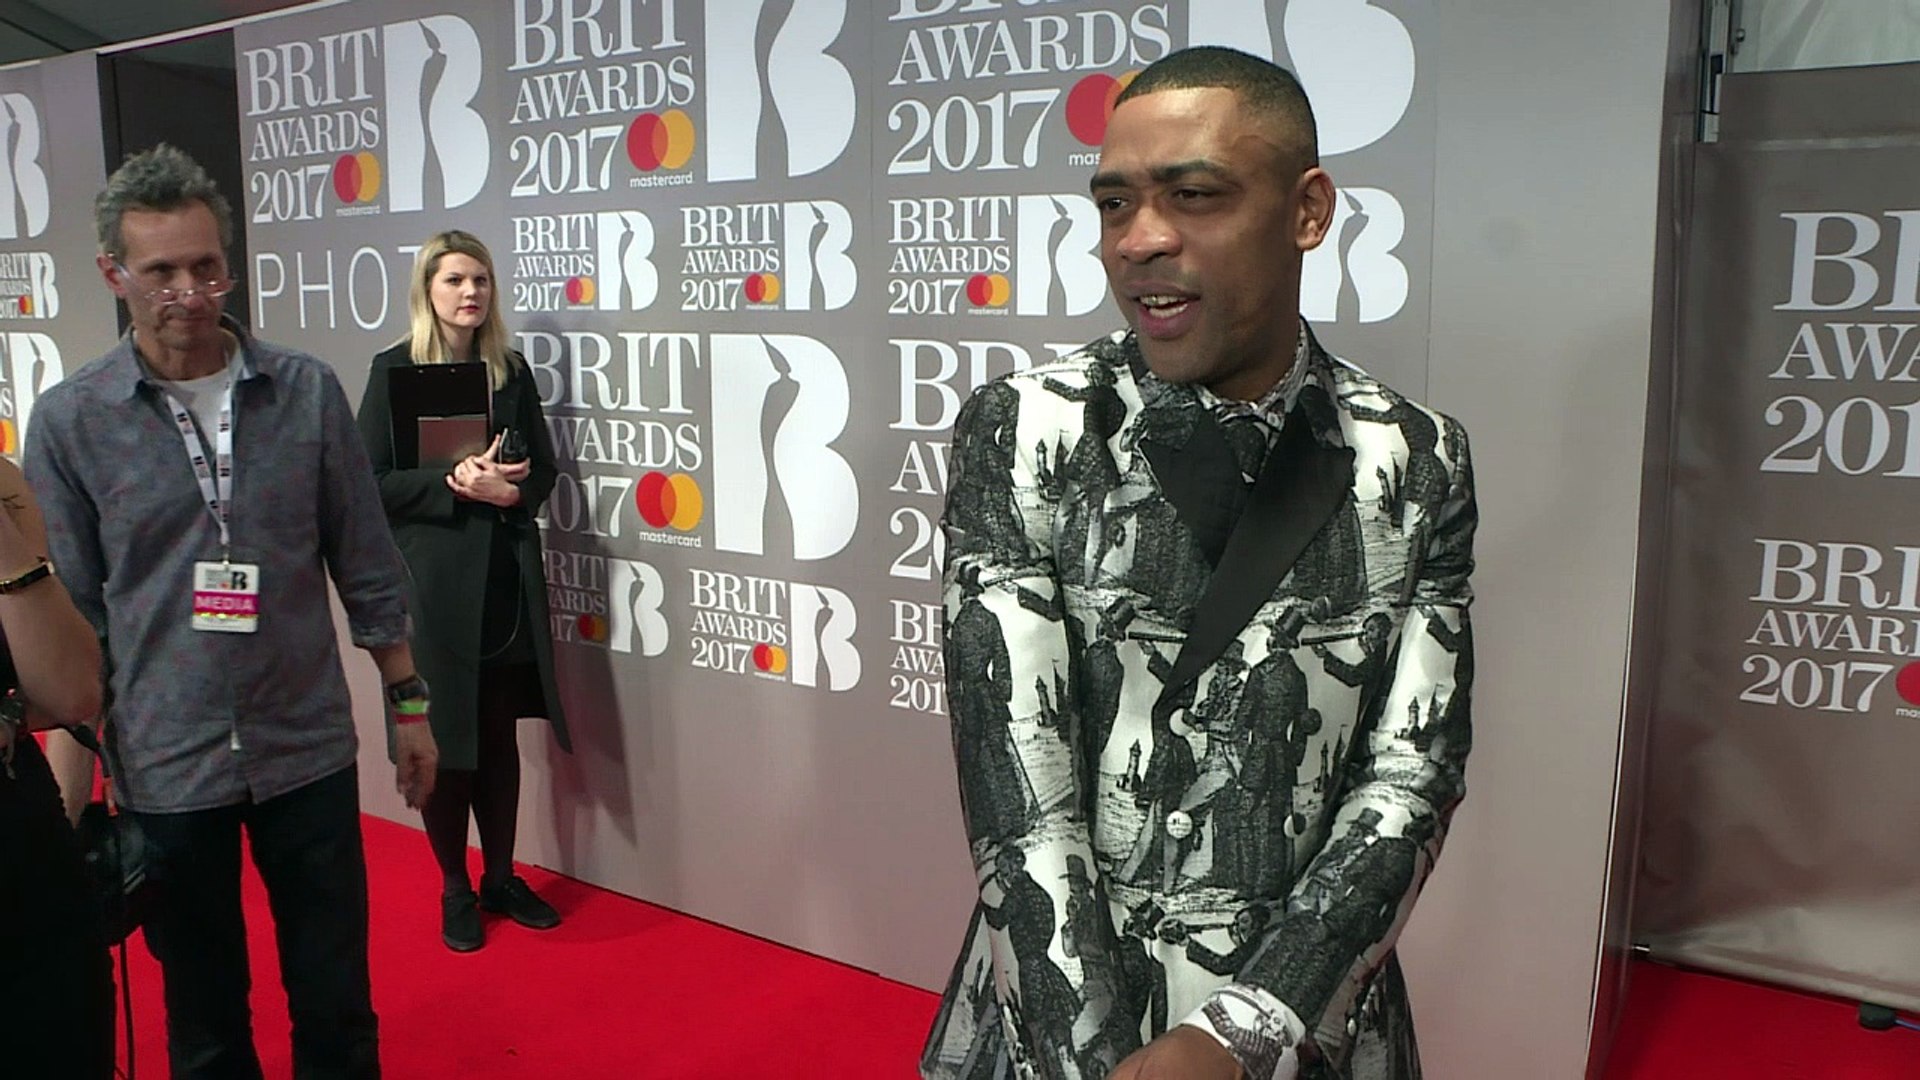 Wiley predicts a big change at The BRIT Awards next year!